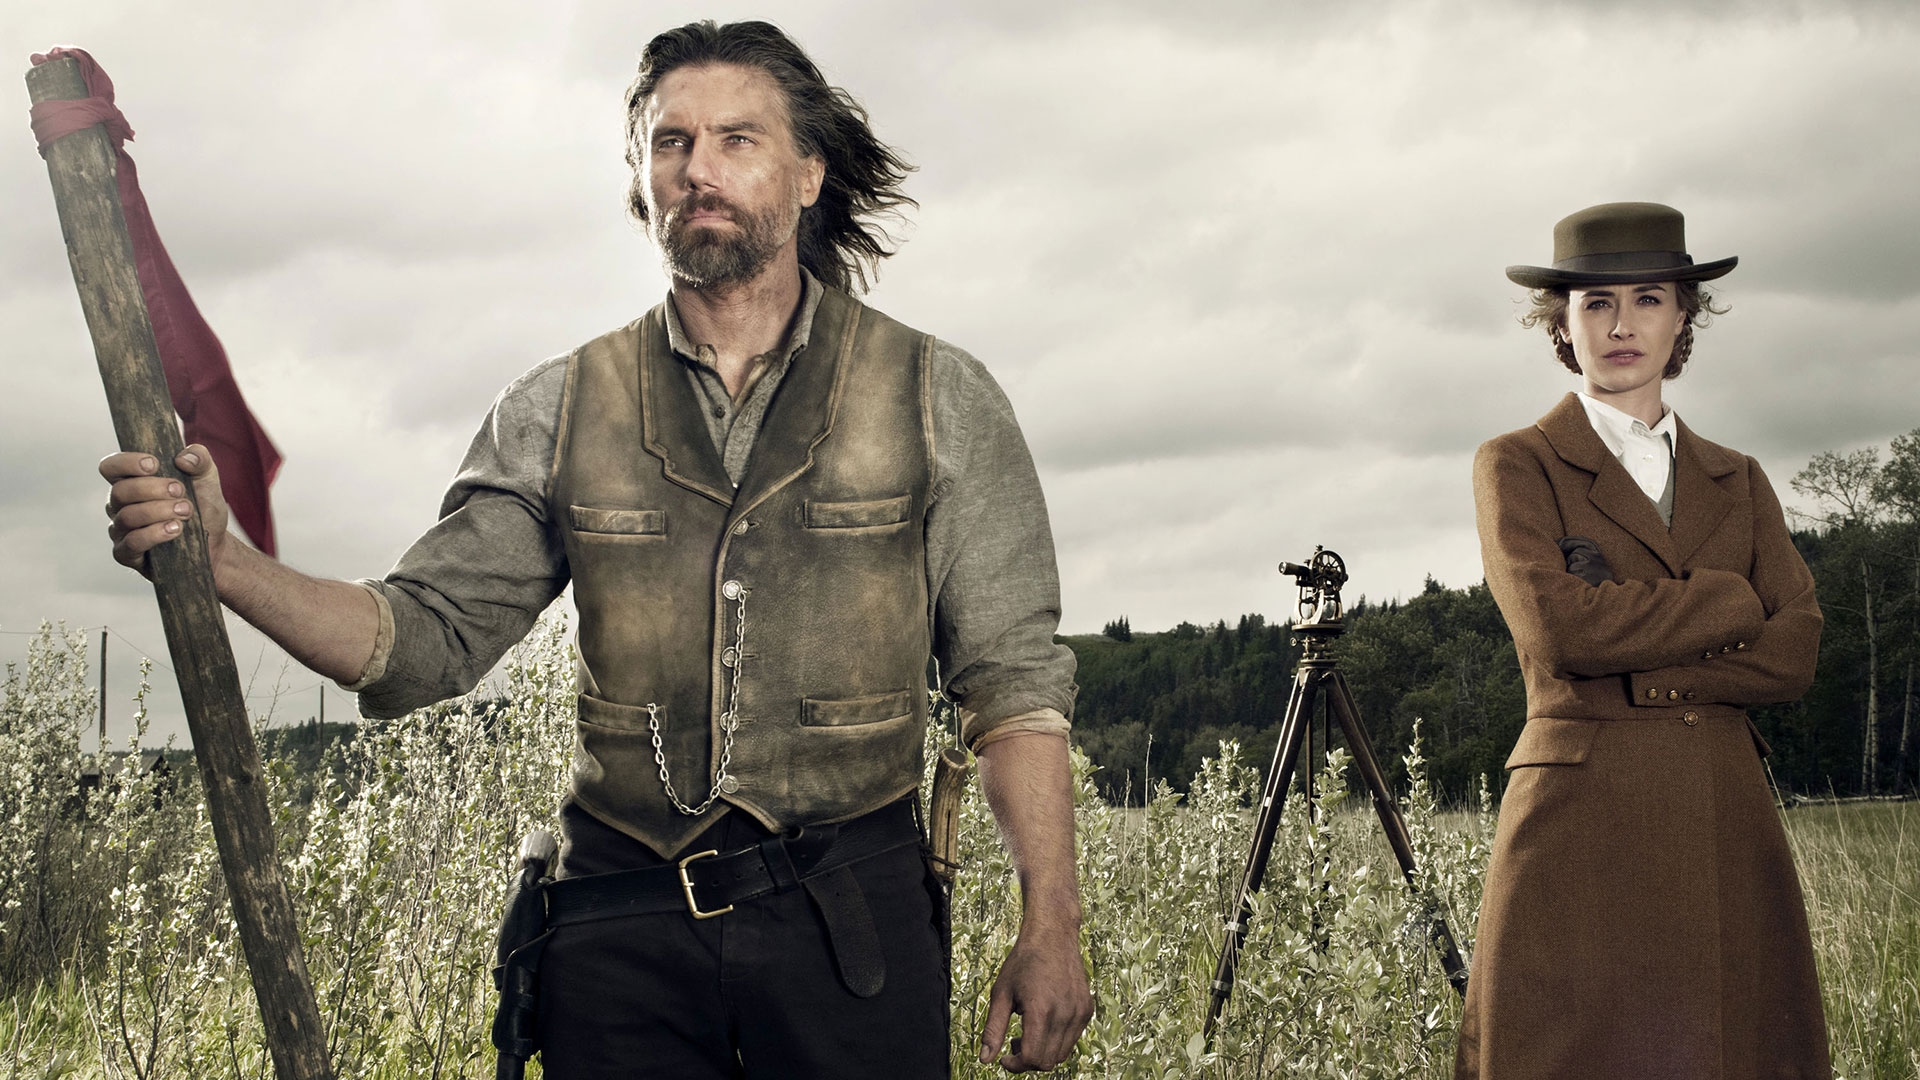 TV Show Hell on Wheels HD Wallpaper | Background Image